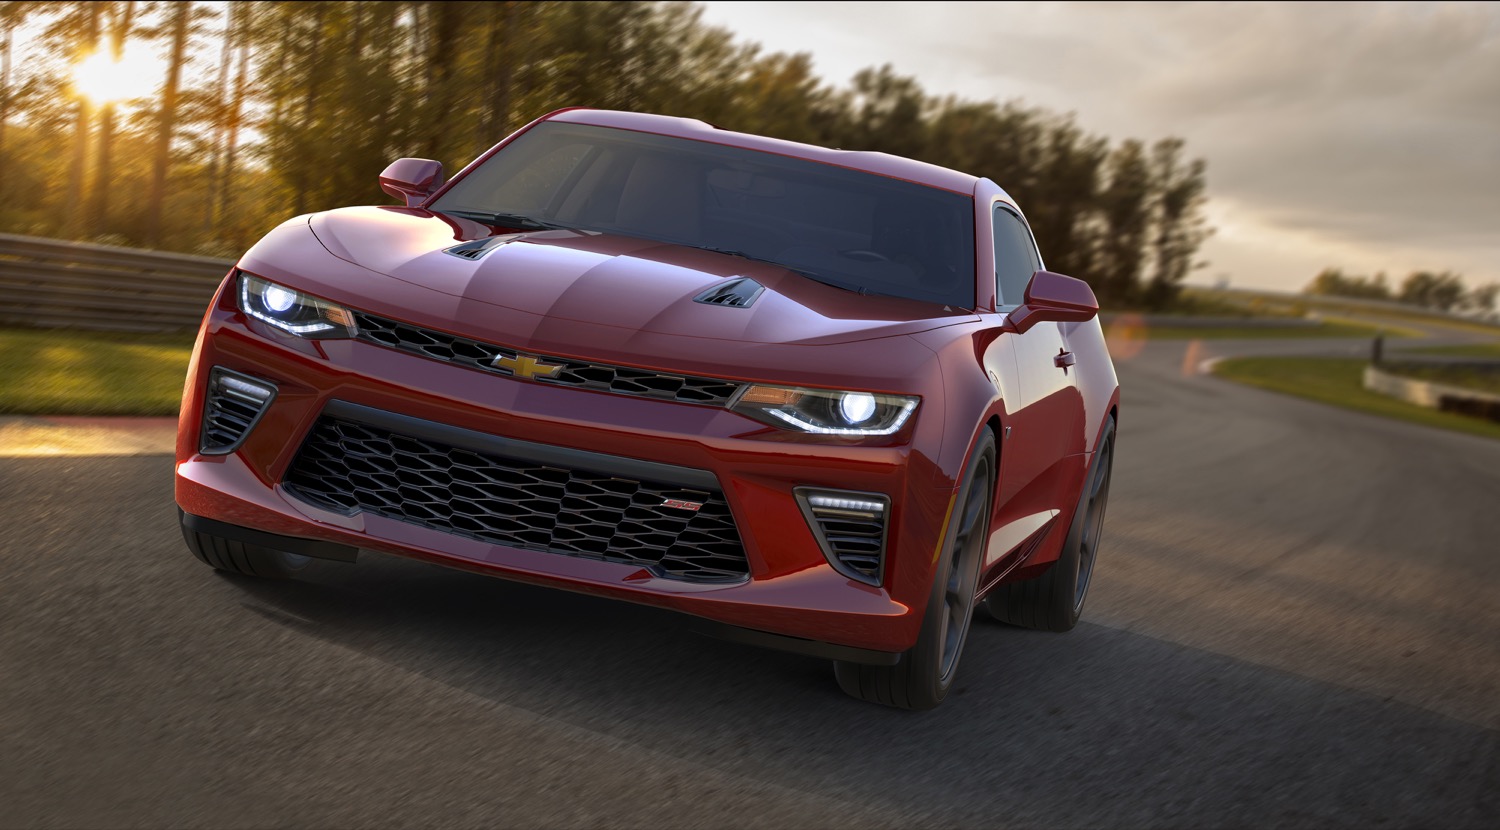 Chevy Serious About Camaro Performance